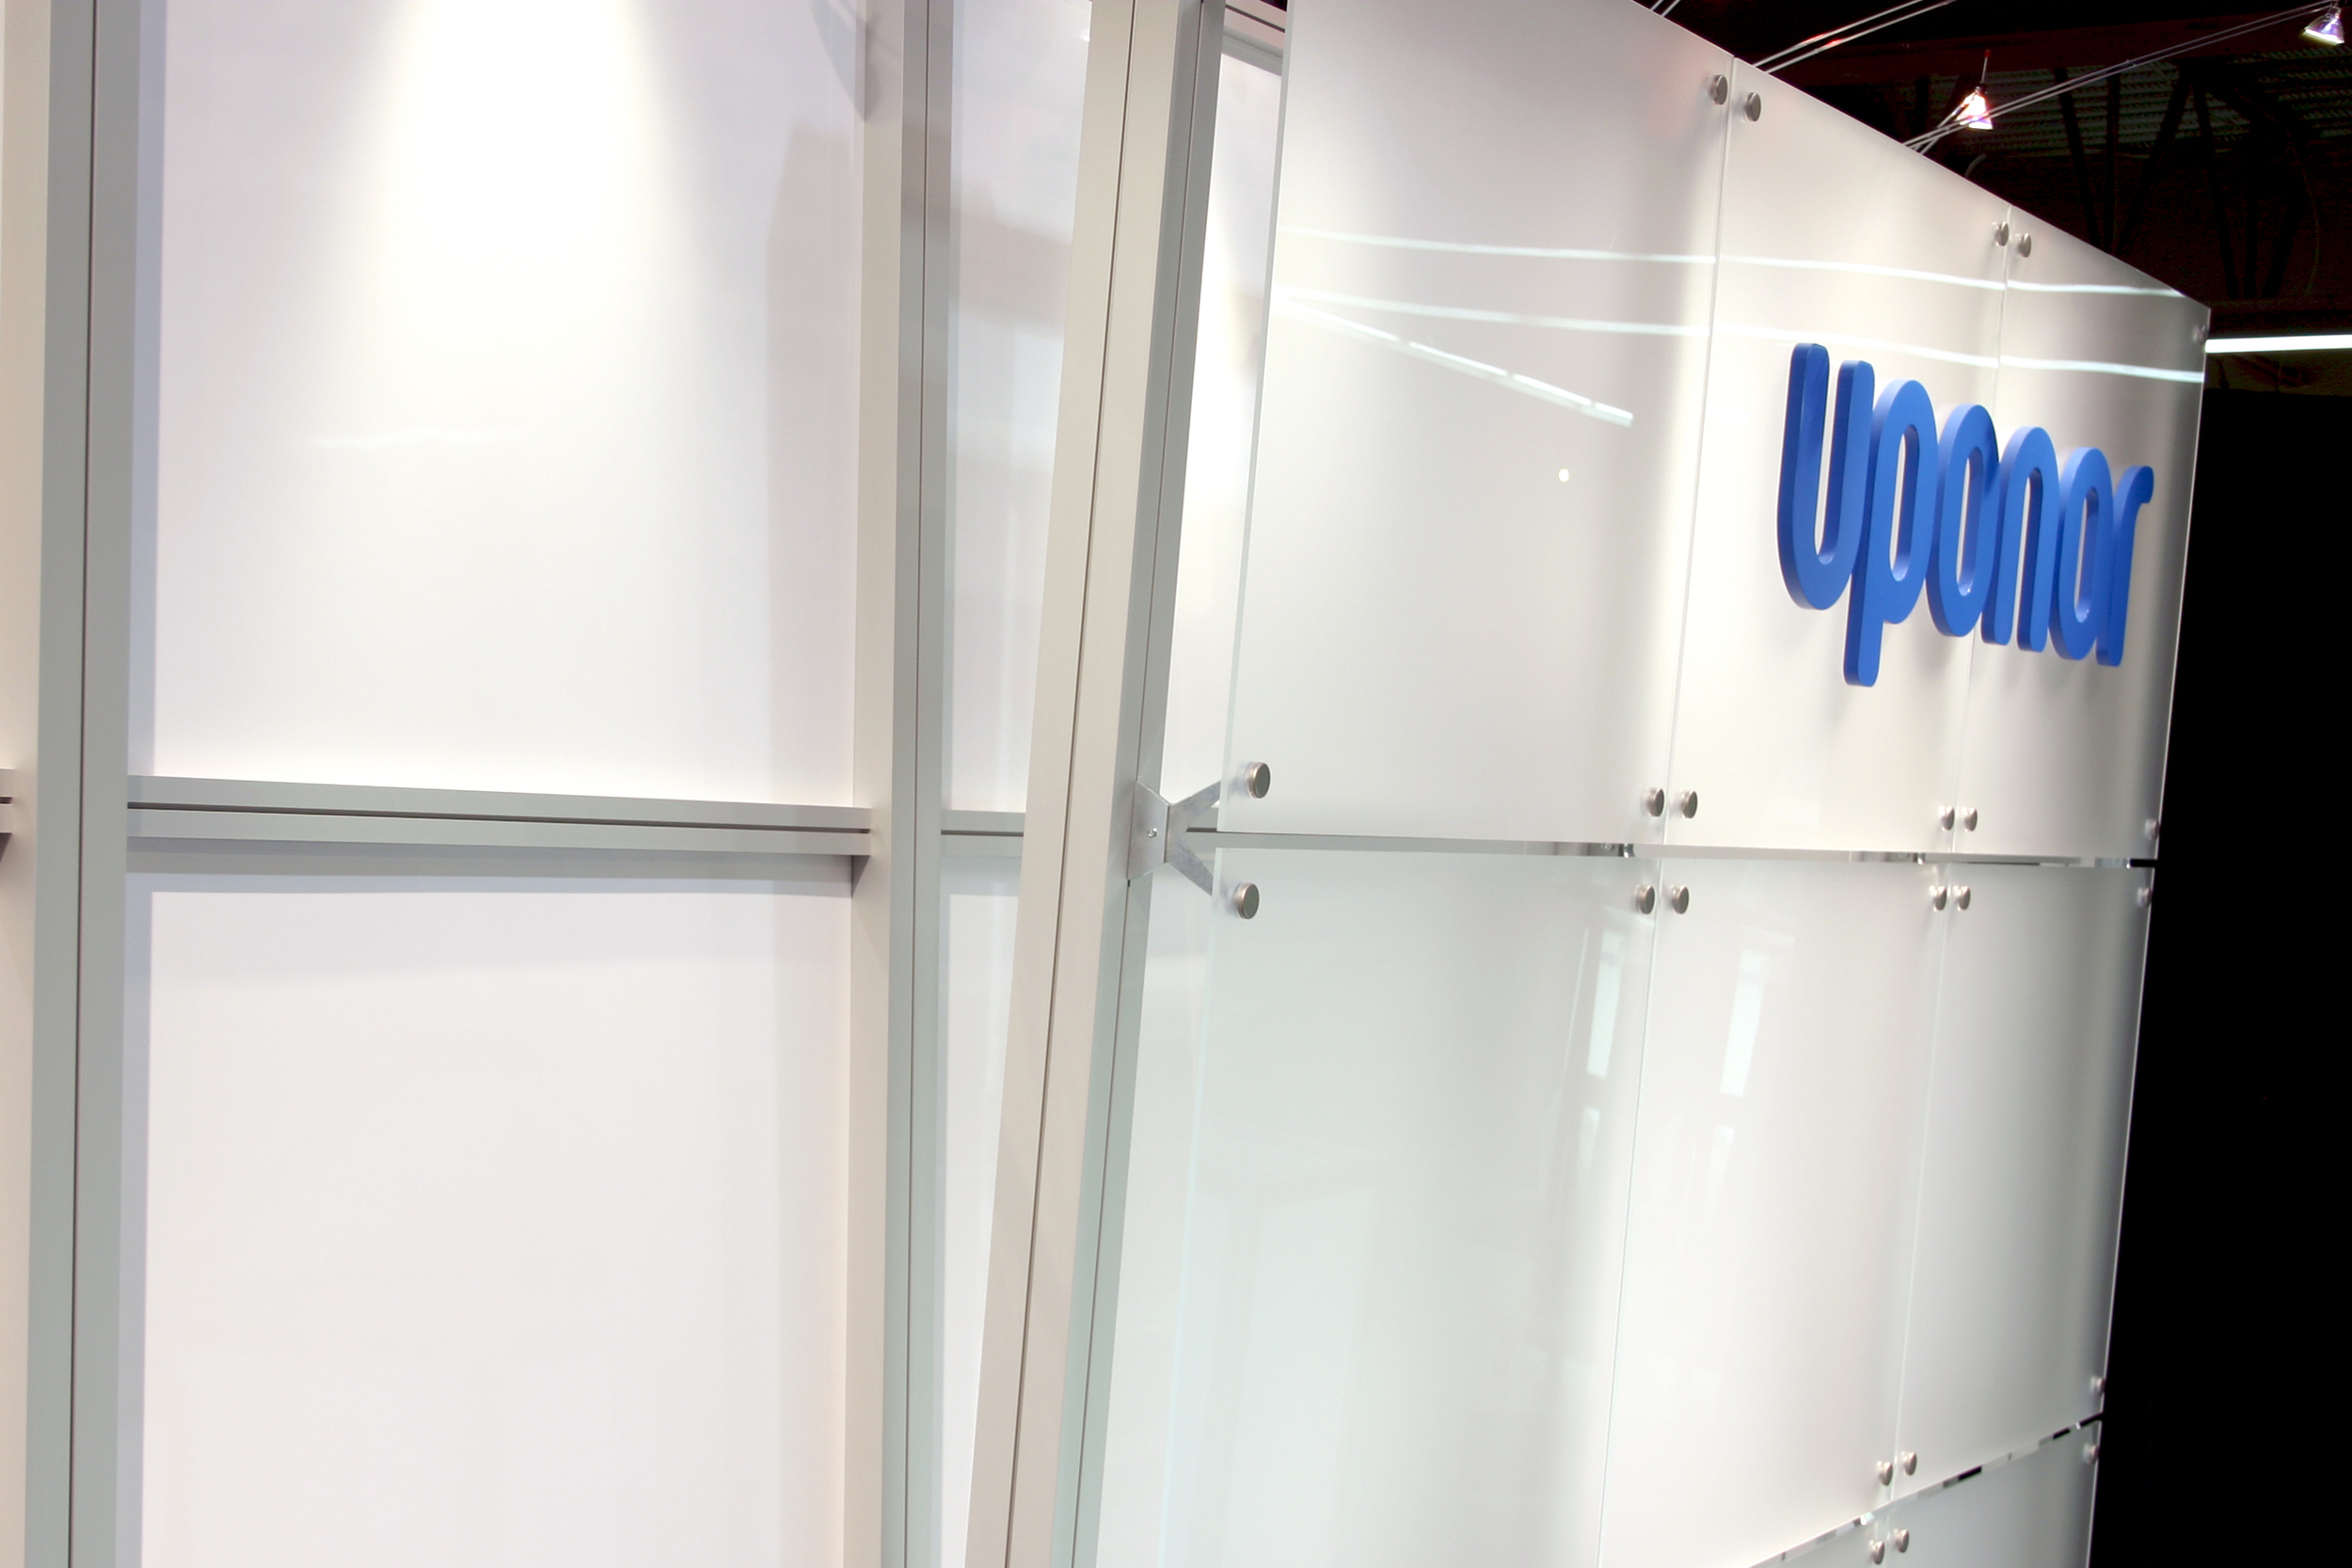 This modern 10' x 20' booth showcases product on glowing pedestals and a clean backwall highlighting their branding